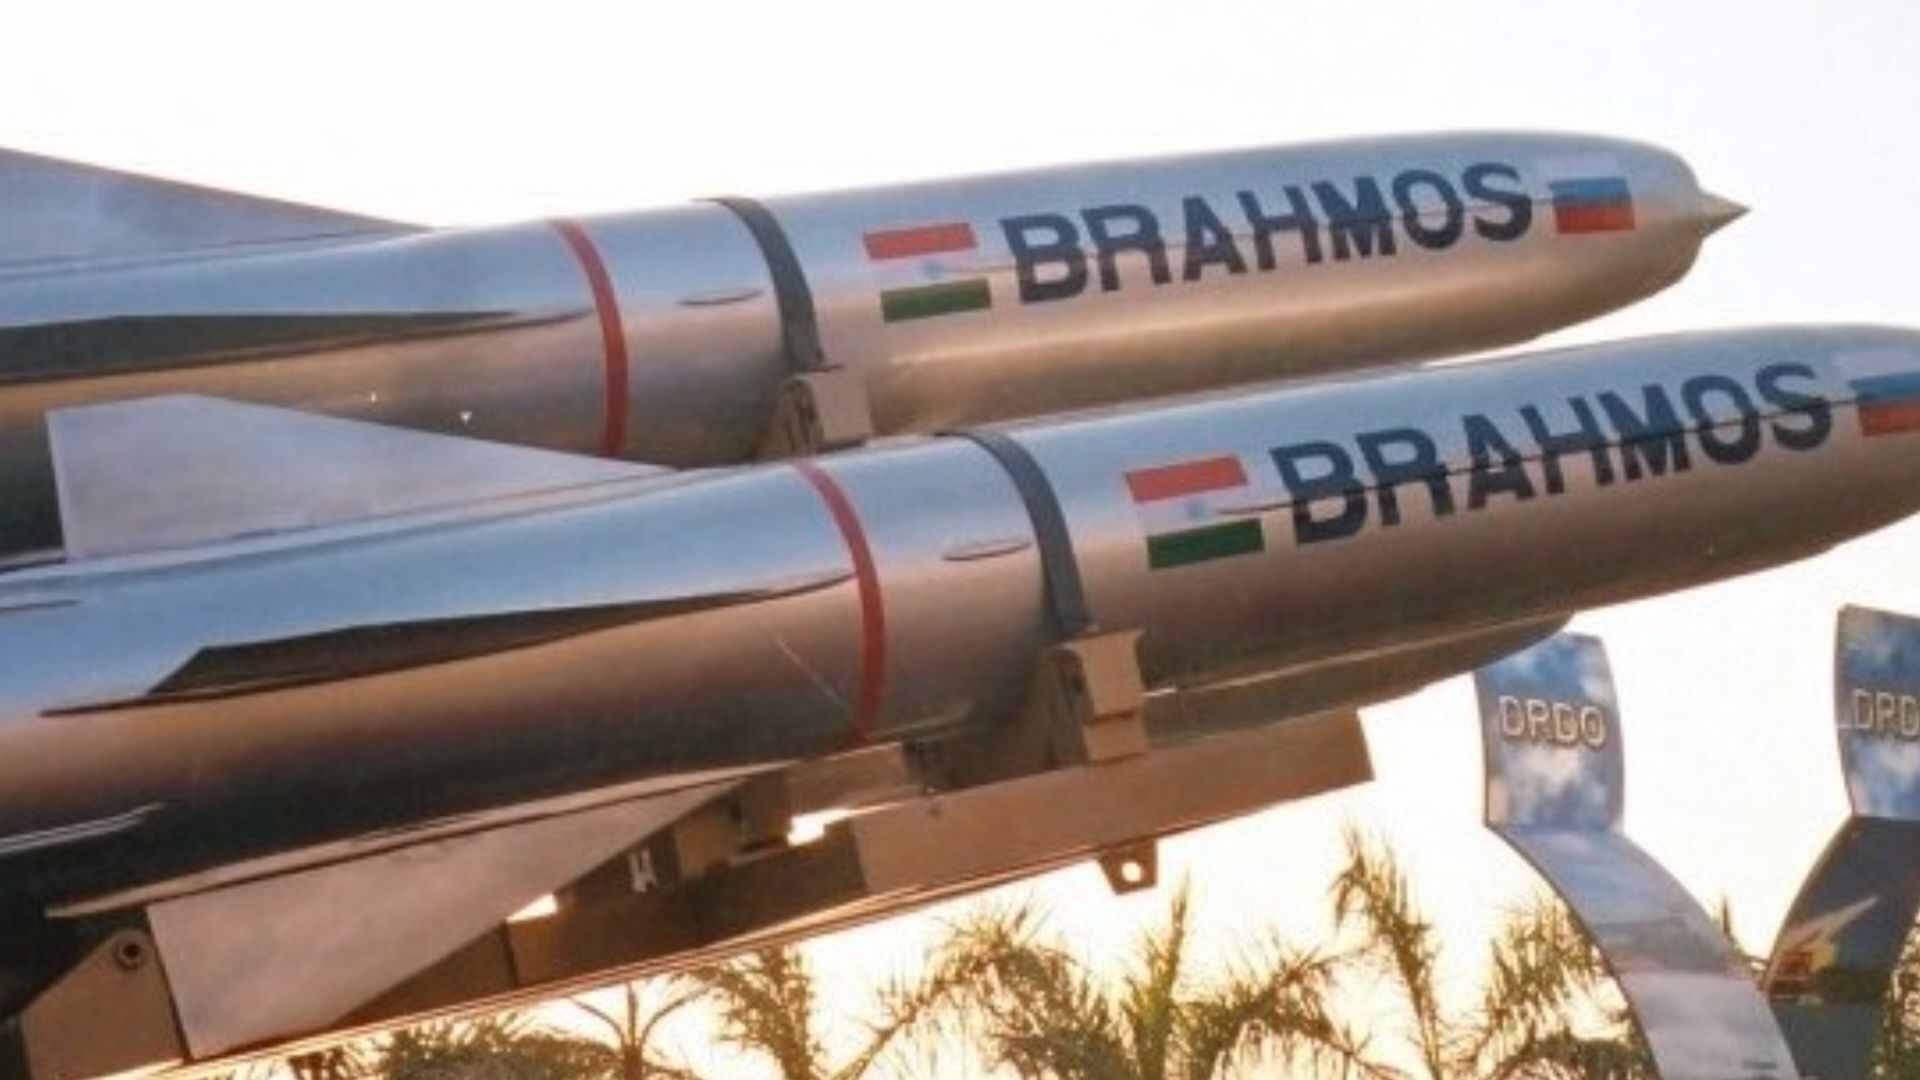 India Delivers Brahmos Missile to Philippines